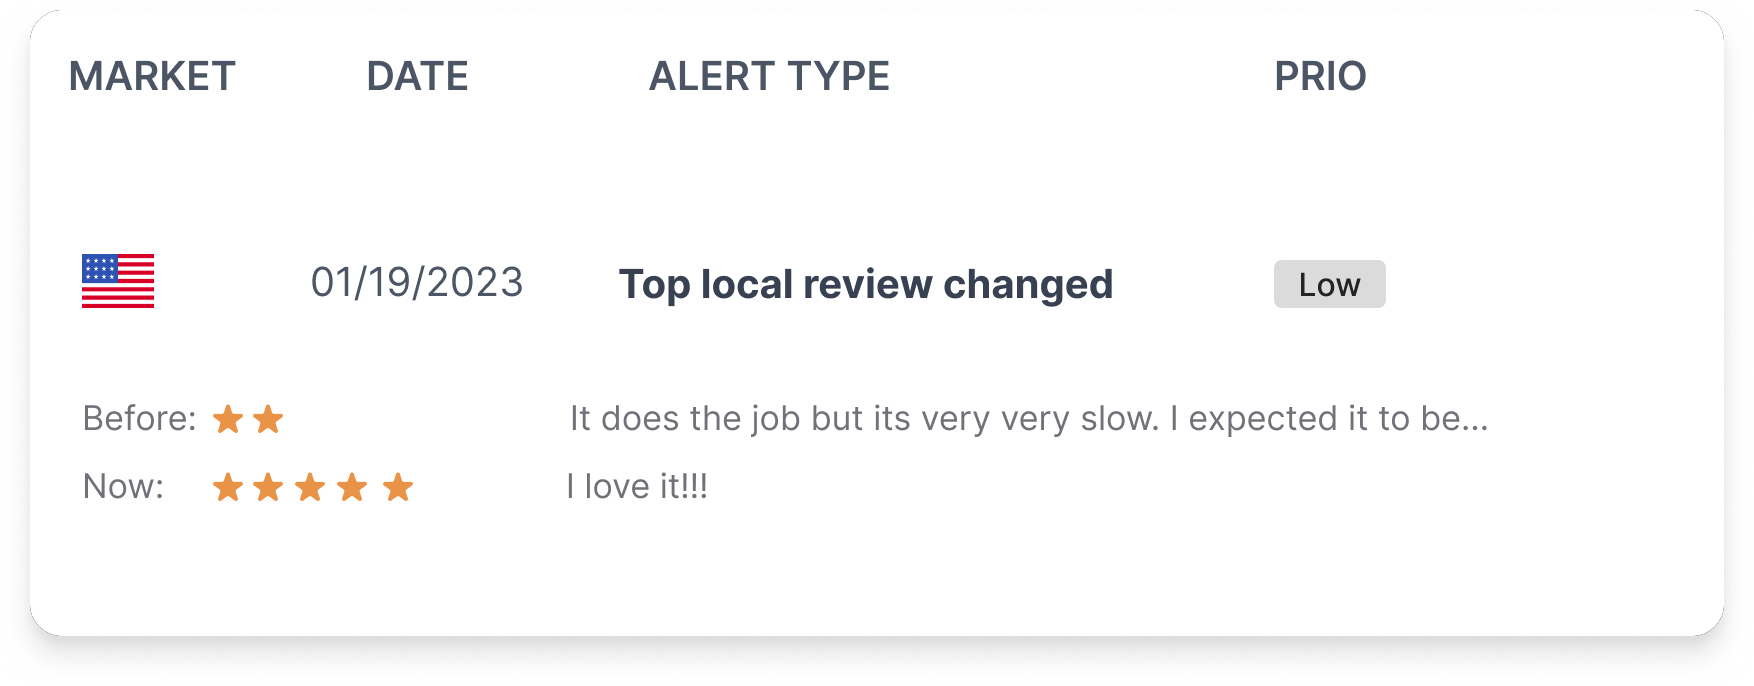 Top local review changed